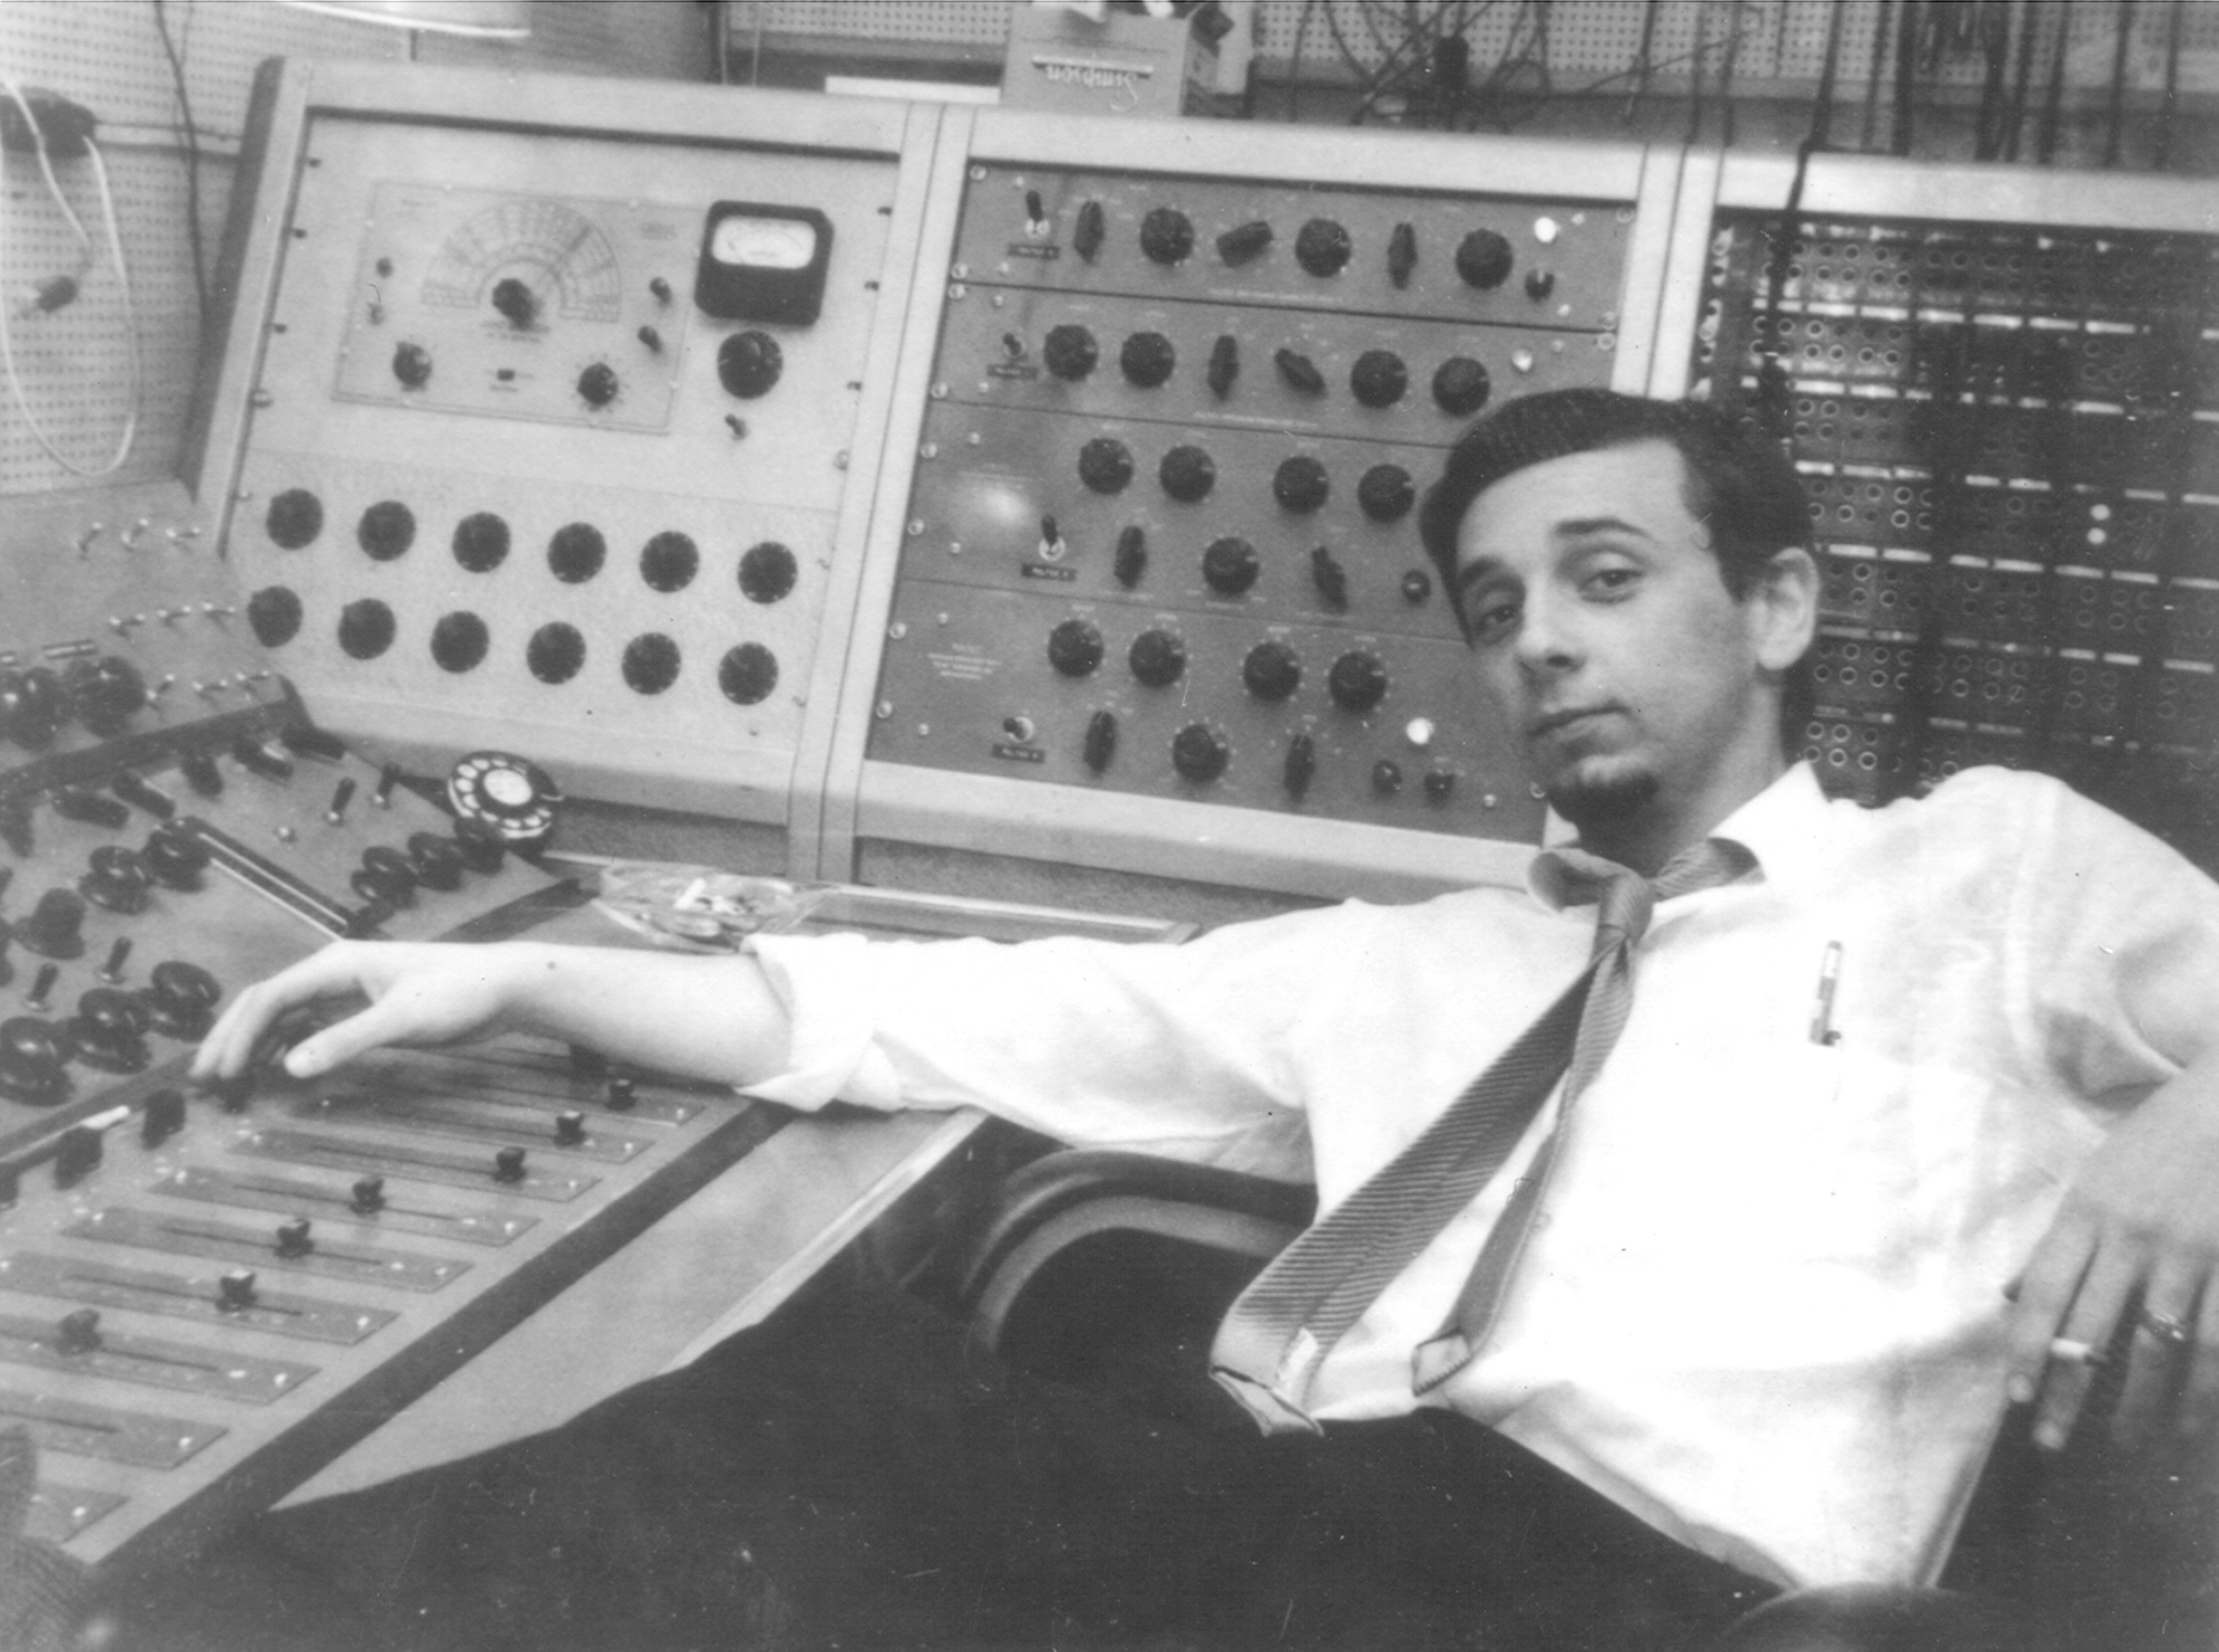 Phil Spector wearing a tie